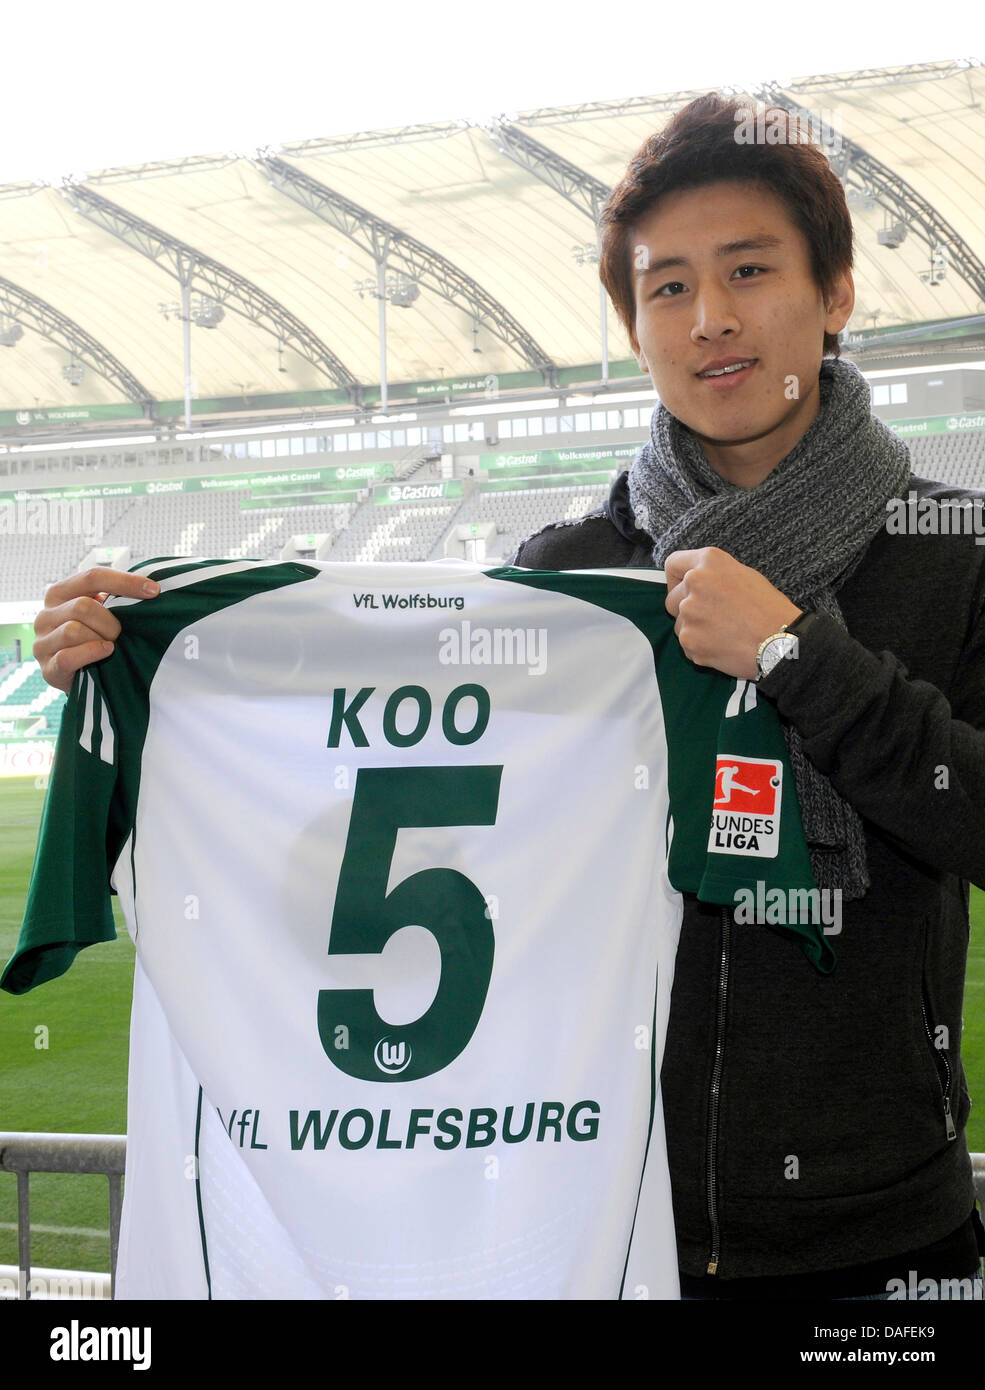 German Bundesliga club VfL Wolfsburg's new signed midfielder Koo Ja-Cheol poses with his jersey in Wolfsburg, Germany, 23 February 2011. South Korea international Koo penned a three-and-a-half contract. Photo: HOLGER HOLLEMANN Stock Photo